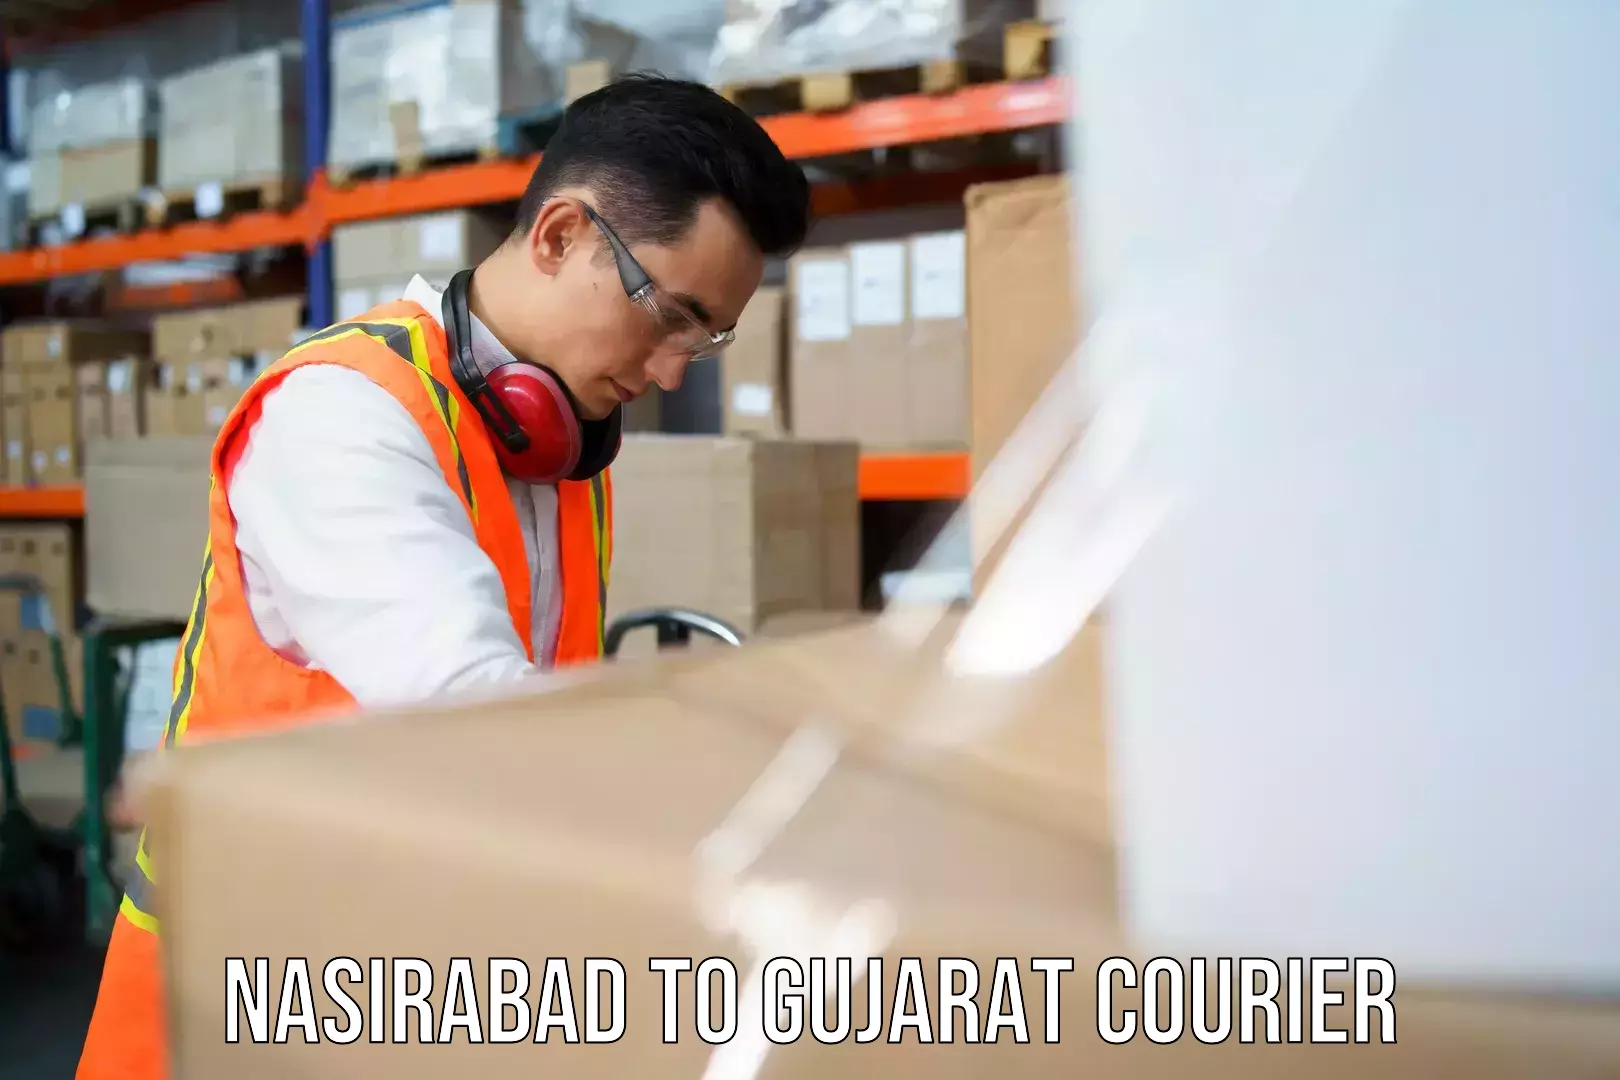 Nationwide delivery network Nasirabad to Gujarat